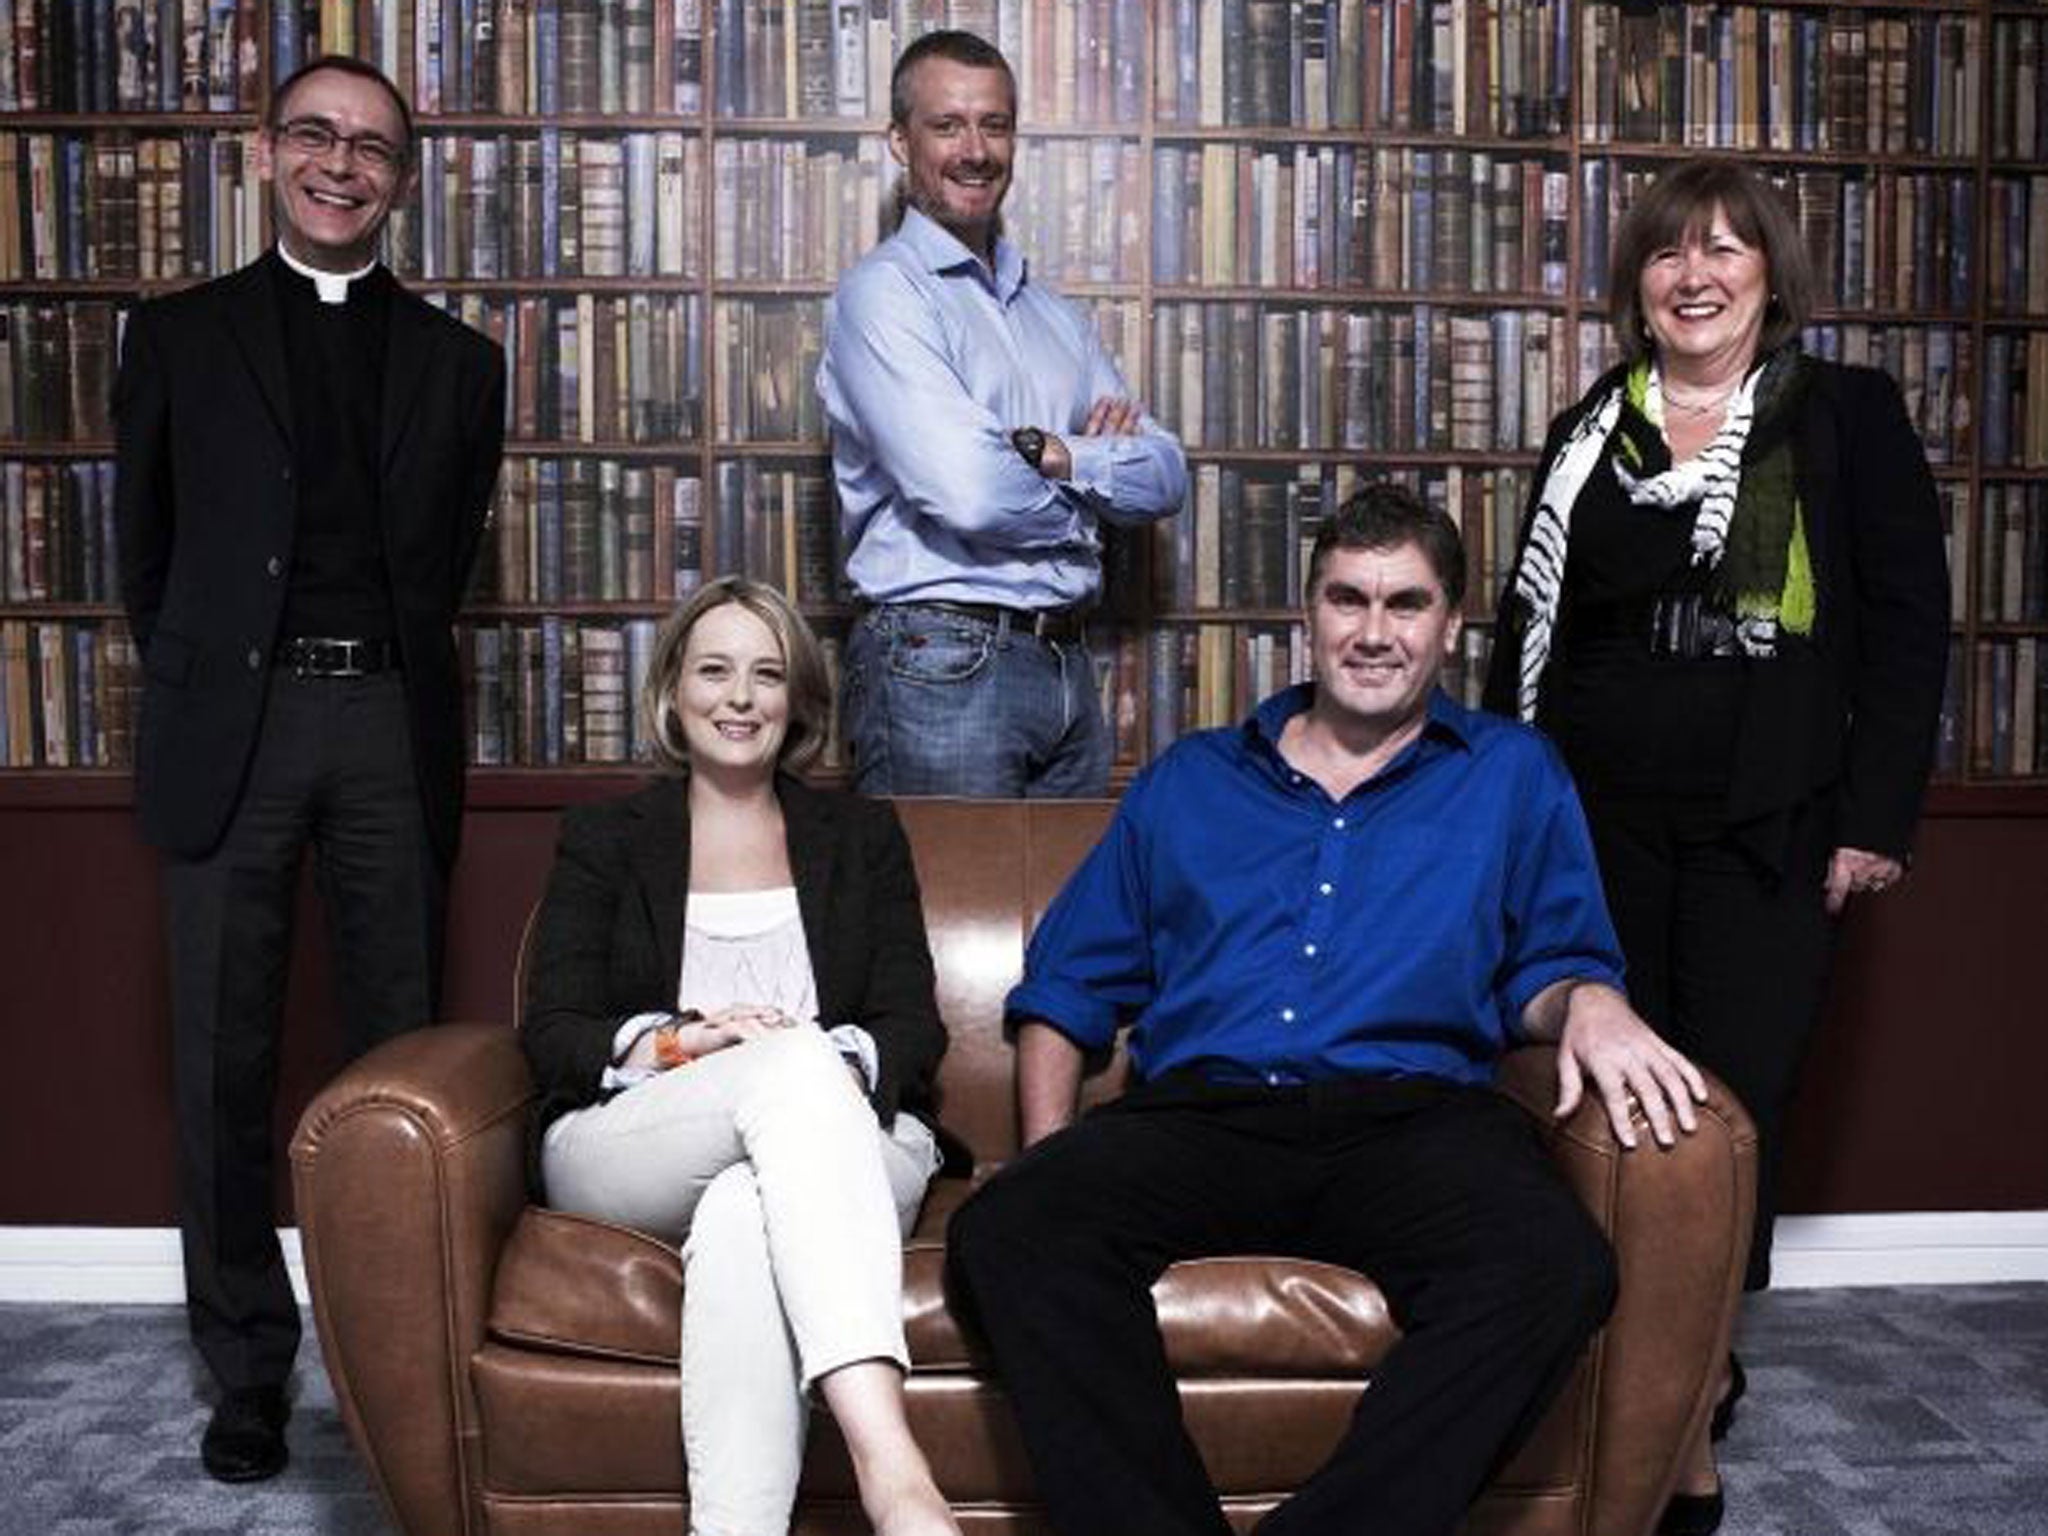 Standing: Married at First Sight's Rev Nick Devenish, Dr Mark Coulsen and psychologist Jo Coker. Sitting: Anthropologists Dr Anna Machin and Dr Andrew Irving